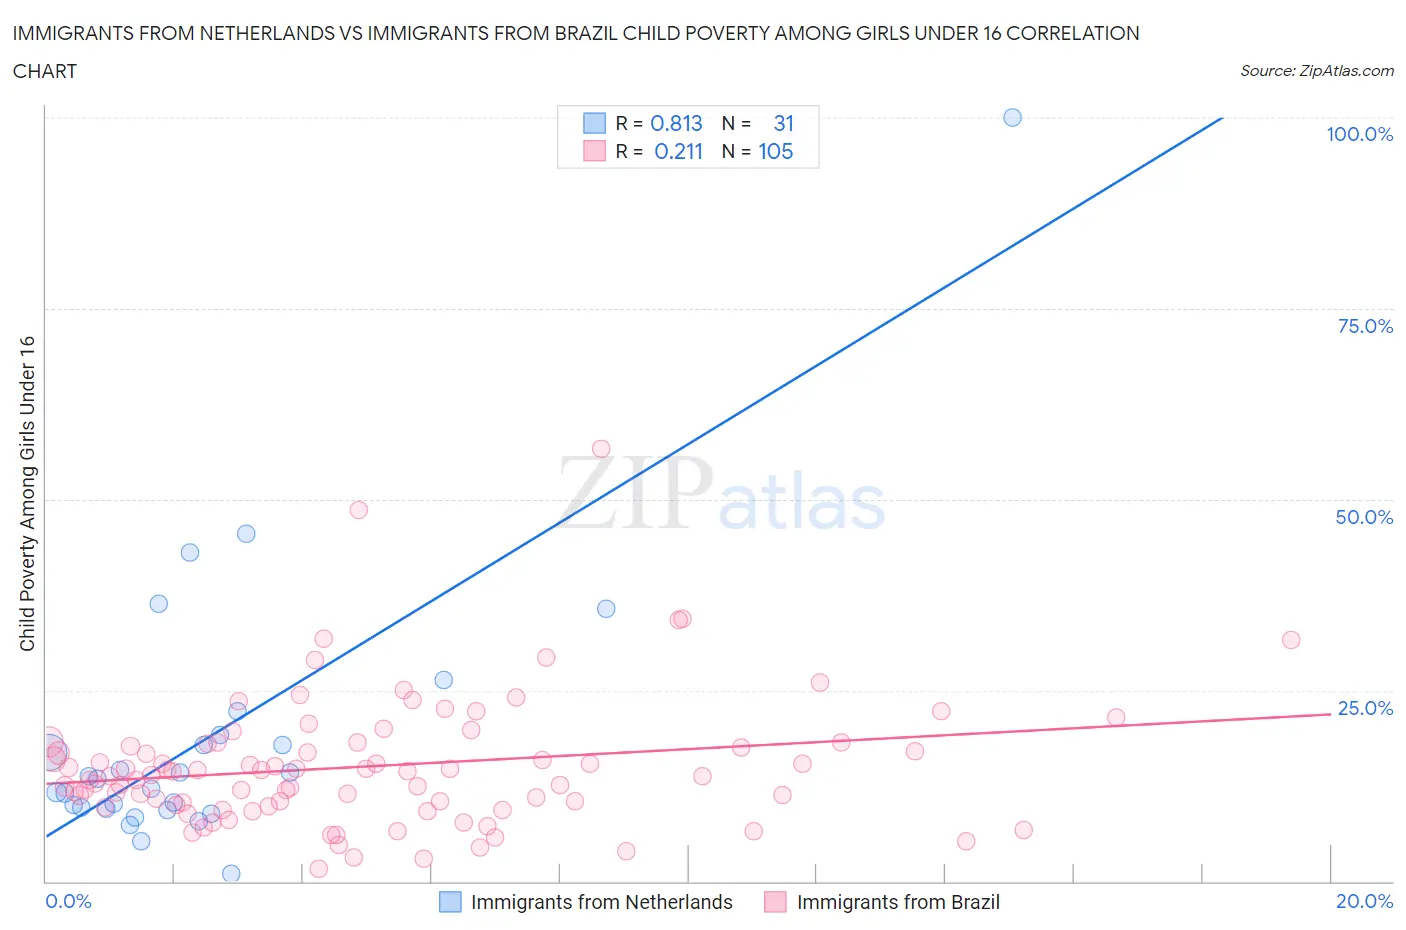 Immigrants from Netherlands vs Immigrants from Brazil Child Poverty Among Girls Under 16